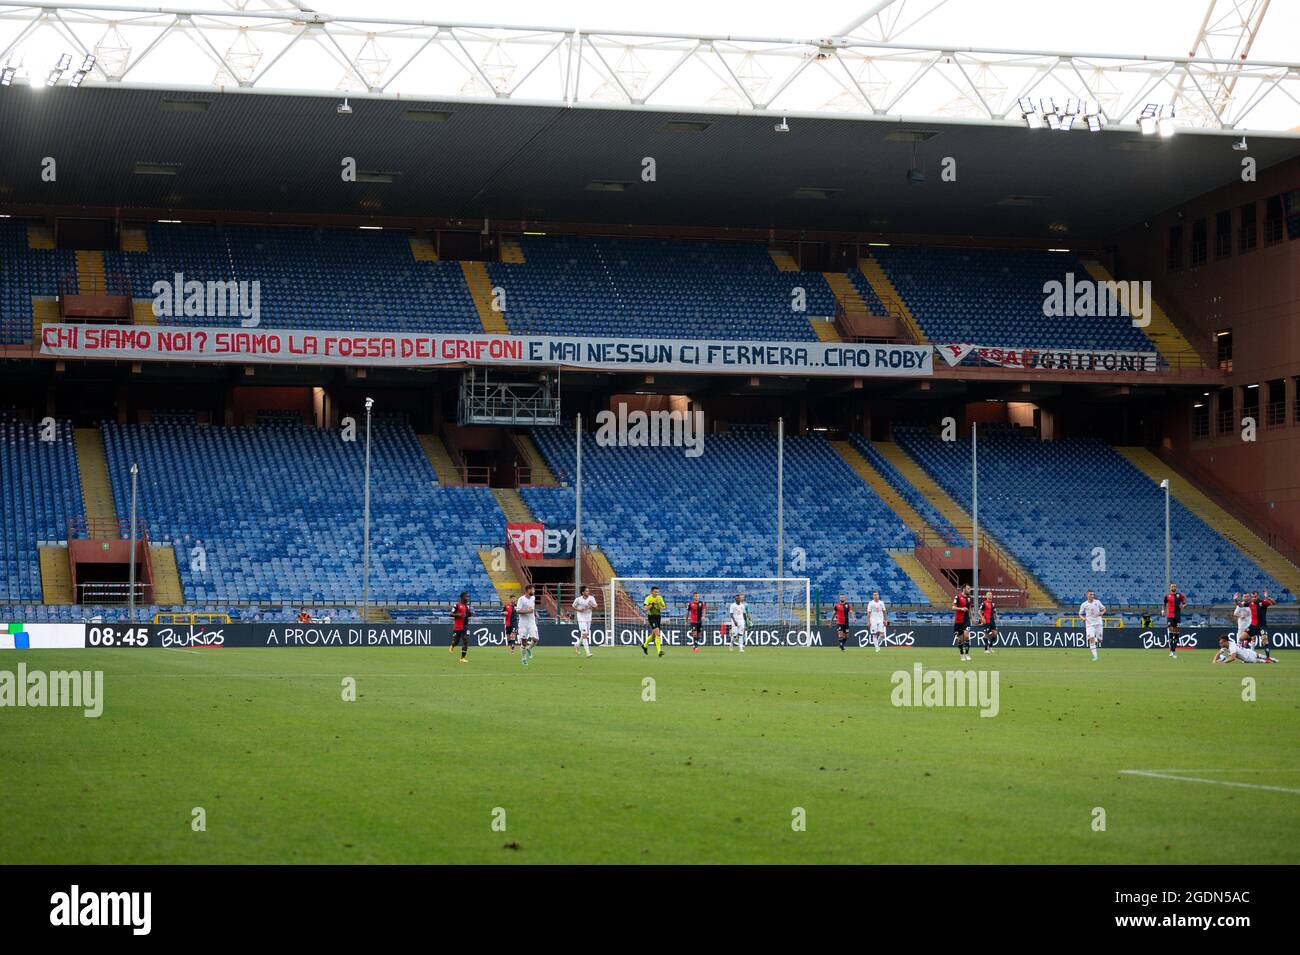 Genoa, Italy. 13 August 2021. A banner for the death of Roberto Scotto leader of 'Fossa dei Grifoni' ultras group is displayed during the Coppa Italia football match between Genoa CFC and AC Perugia. Genoa CFC won 3-2 over AC Perugia. Credit: Nicolò Campo/Alamy Live News Stock Photo